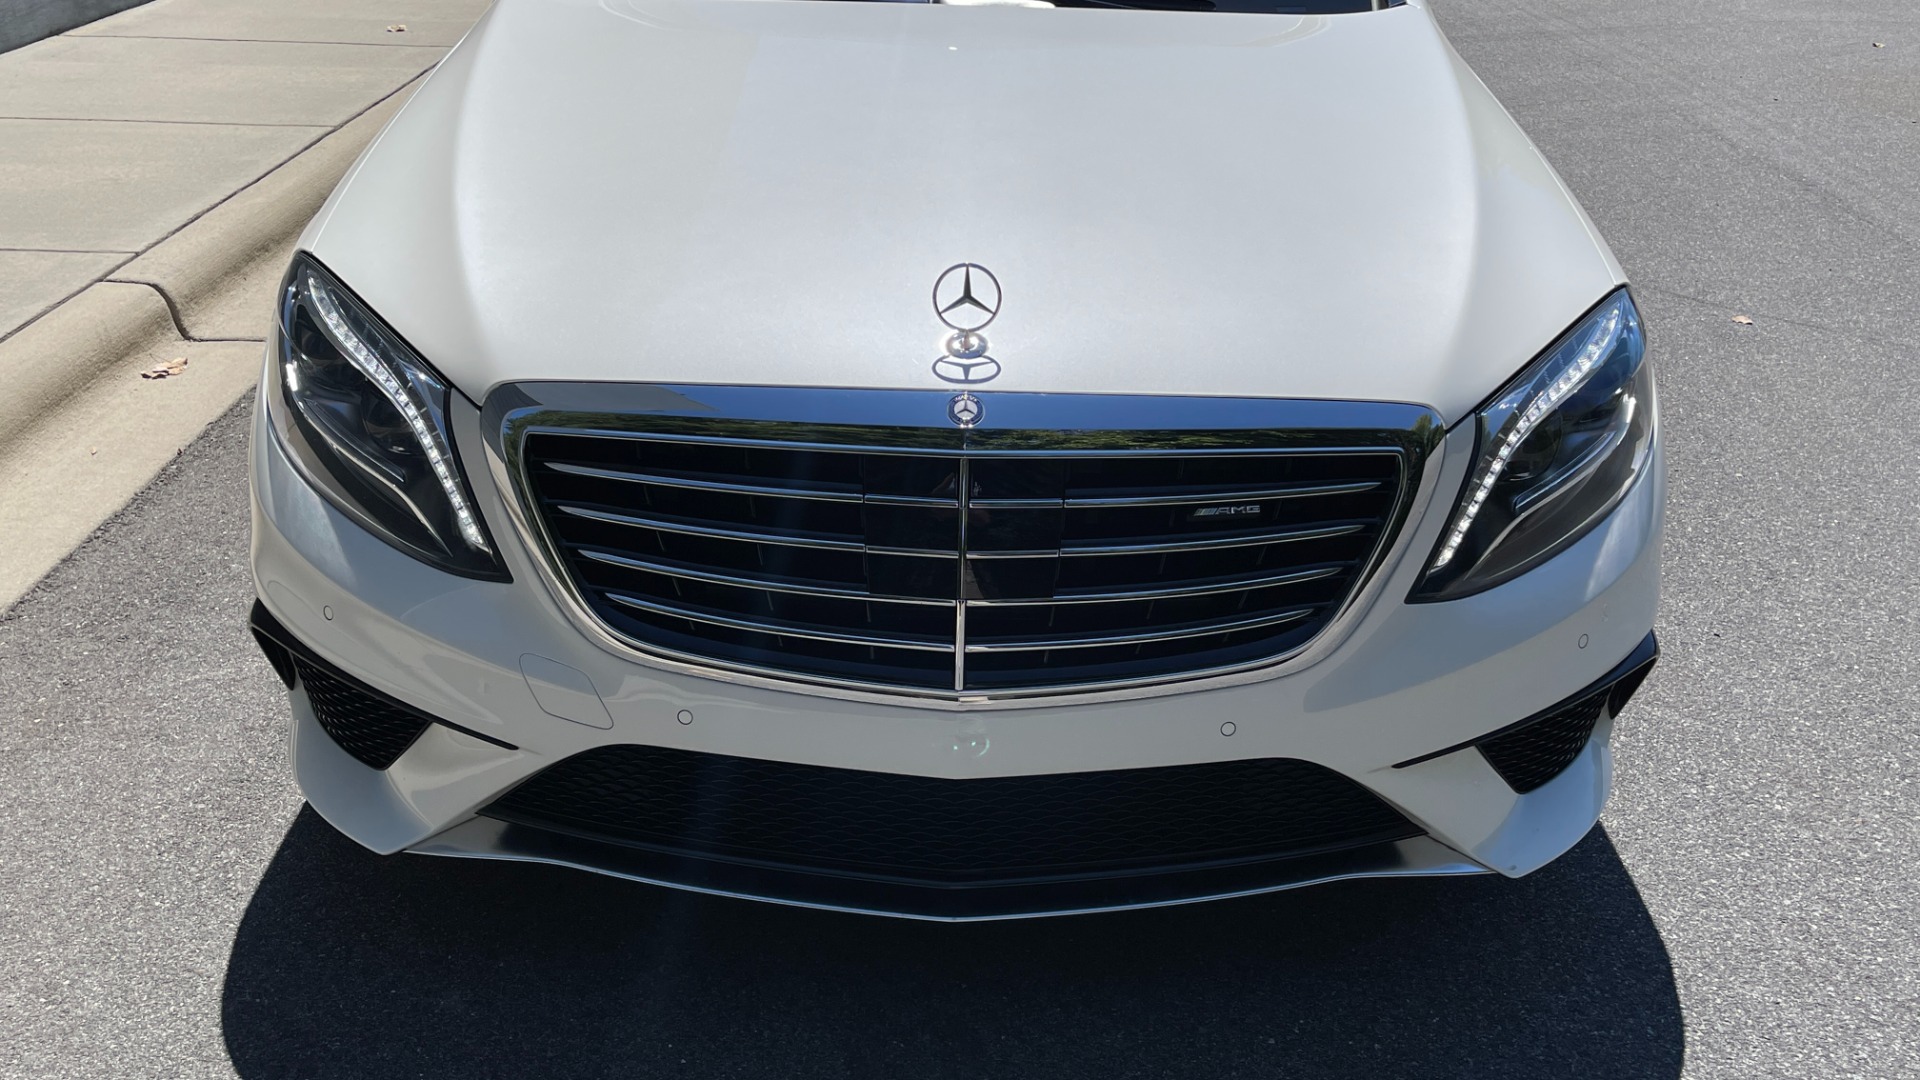 Used 2016 Mercedes-Benz S-Class AMG S63 / EXCLUSIVE TRIM / BURMESTER 3D HIGH END SOUND / DRIVER ASSISTANCE  for sale $68,995 at Formula Imports in Charlotte NC 28227 46